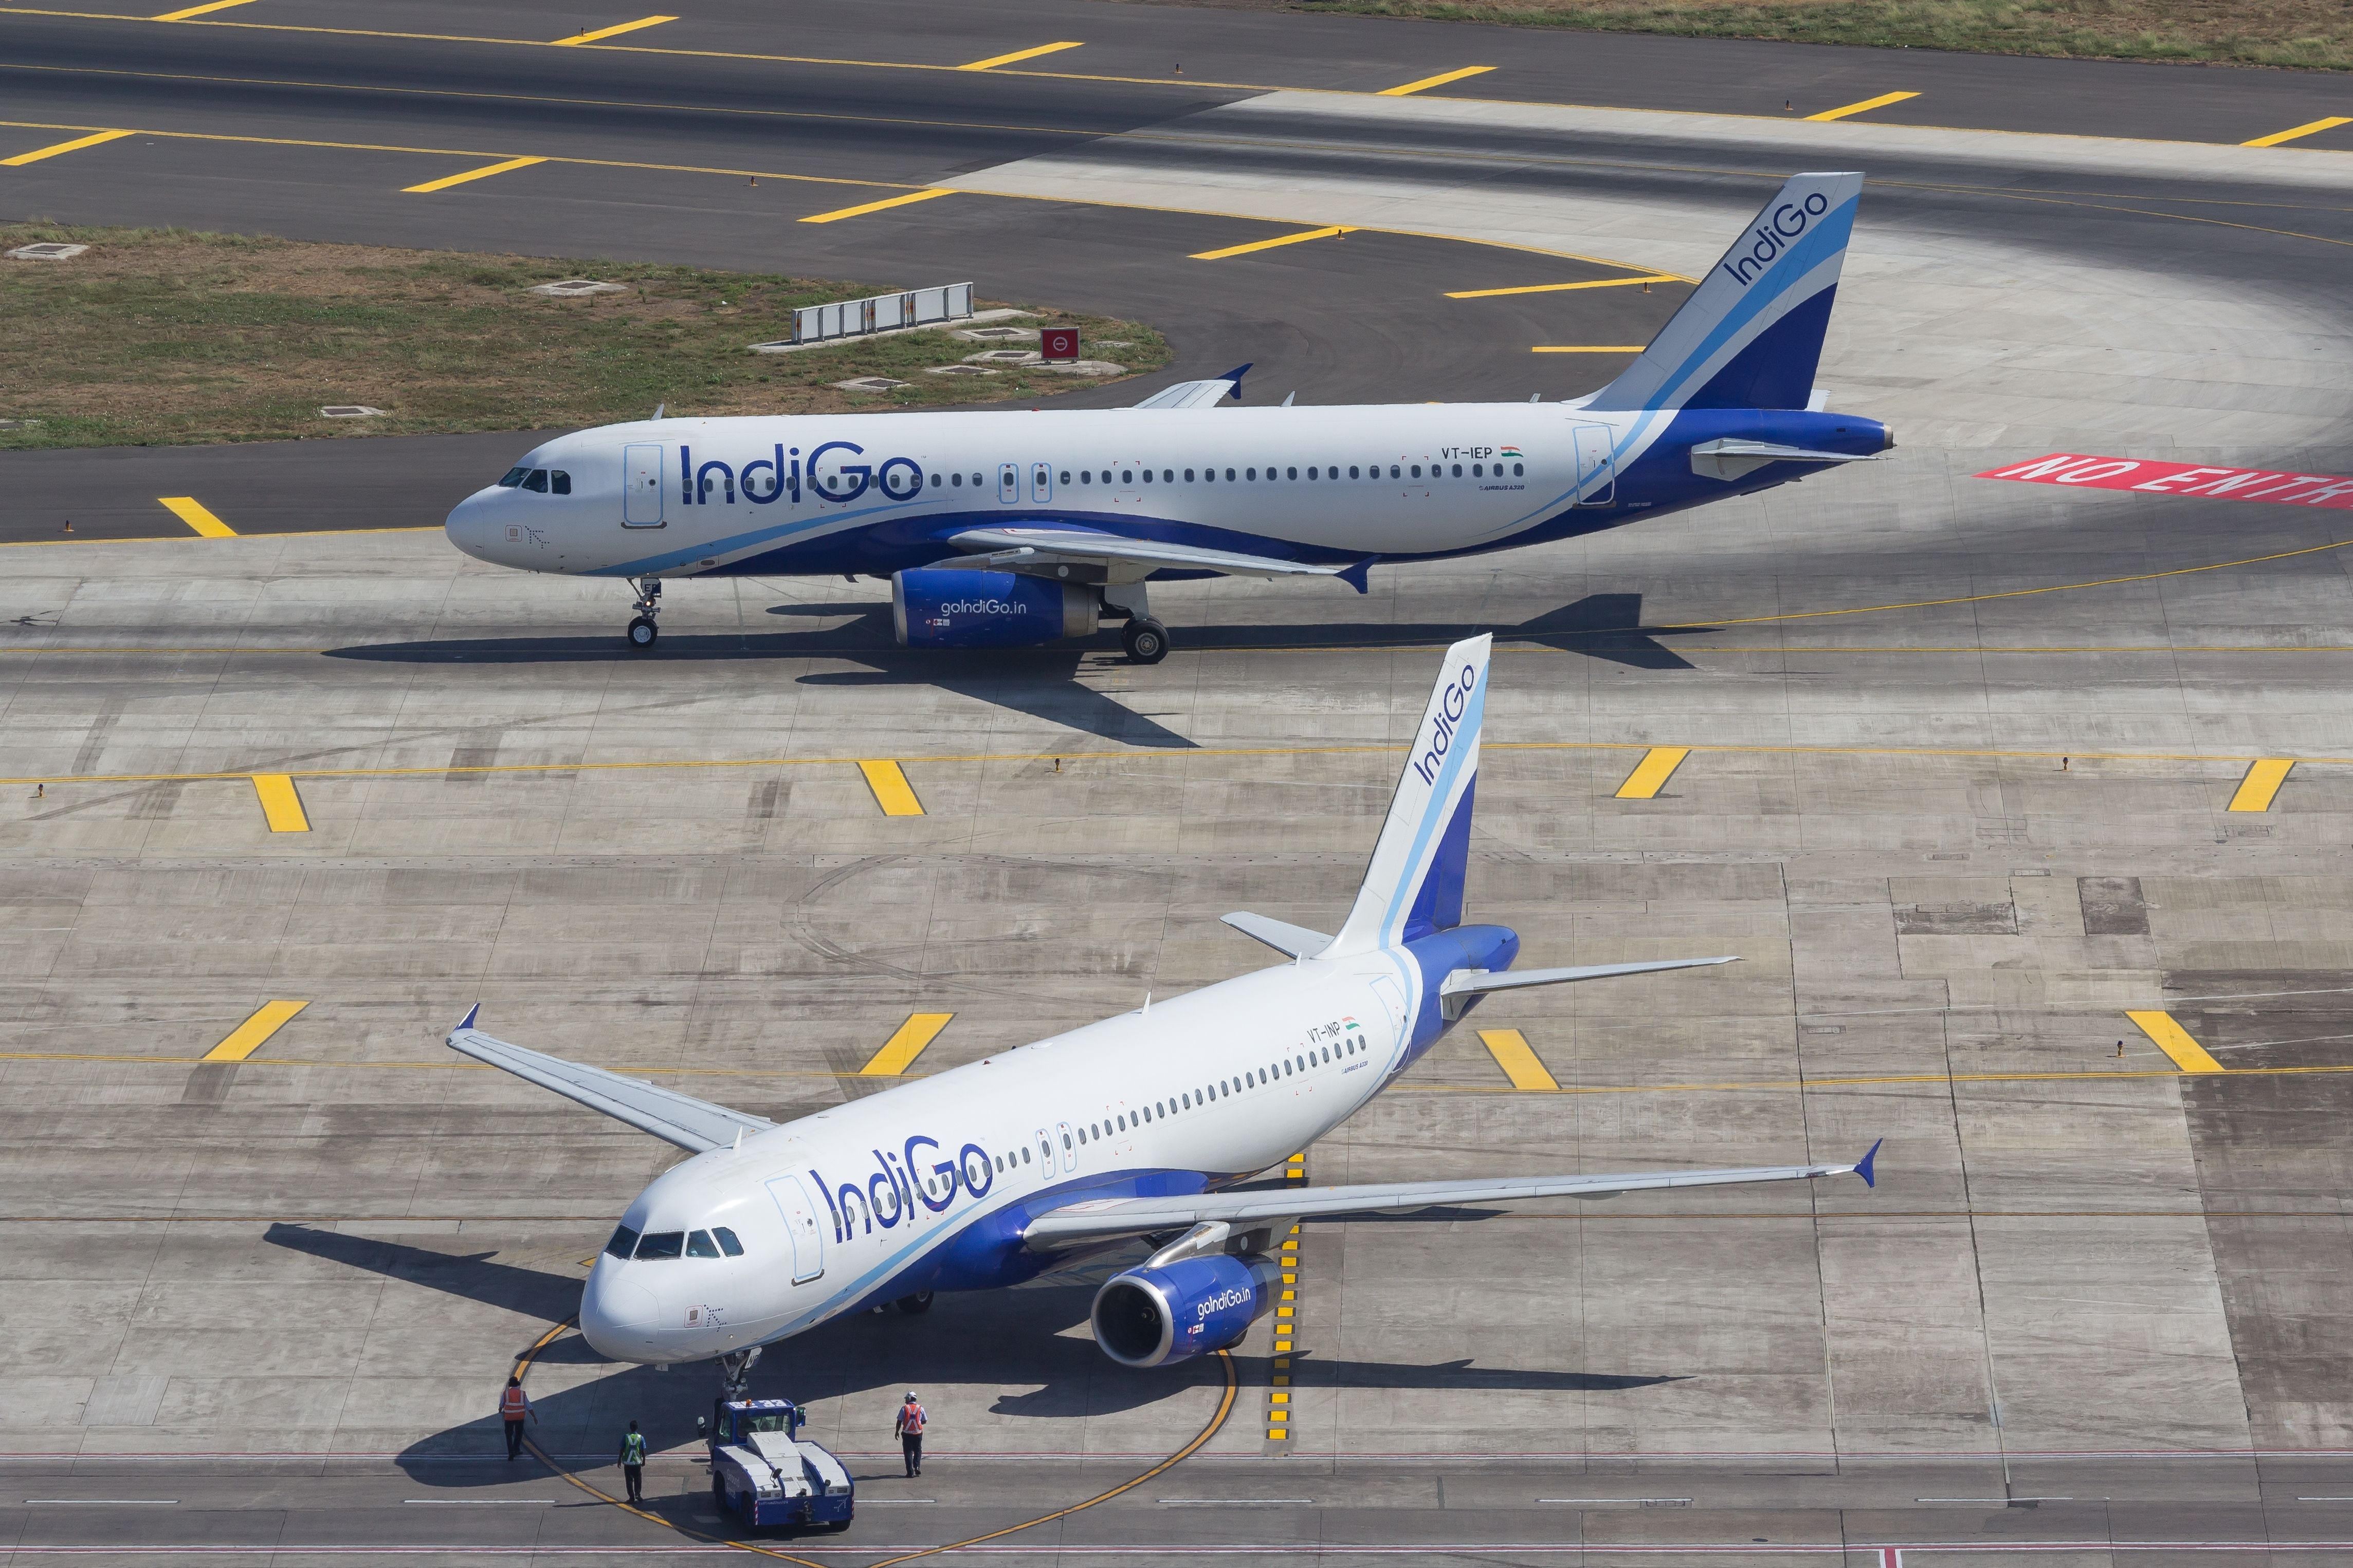 Two IndiGo Airbus A320 aircraft on an airport apron.